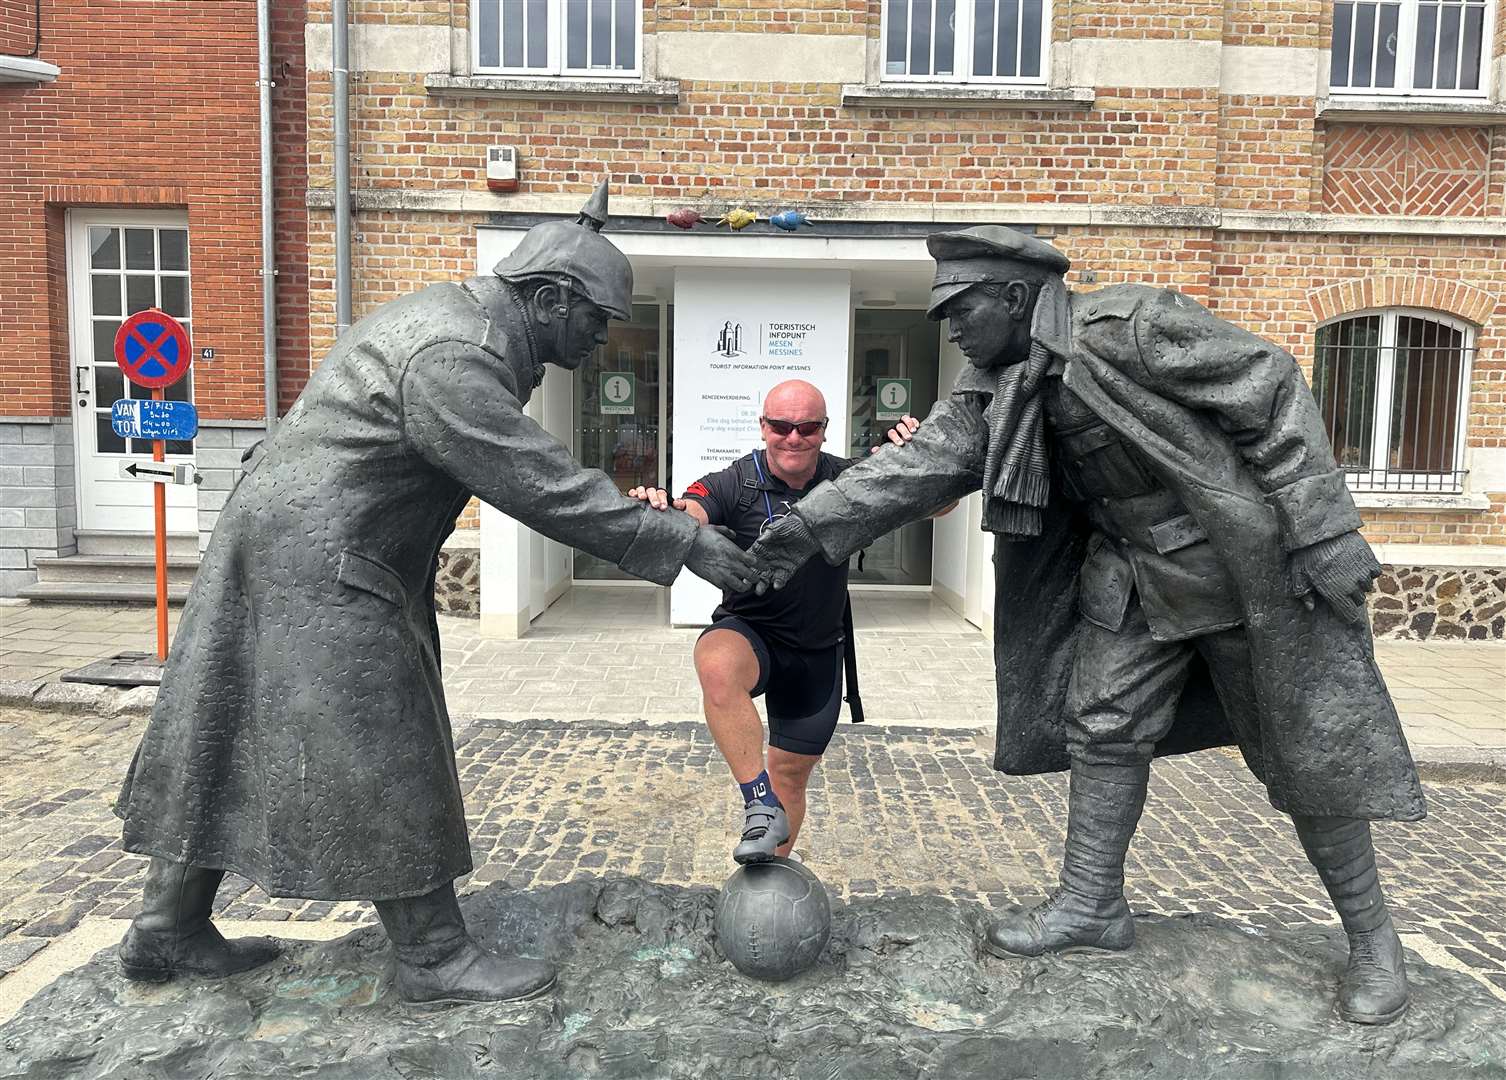 Kev at a statue commemorating the Christmas truce in World War I during the three-day Pedal to Ypres challenge in July.